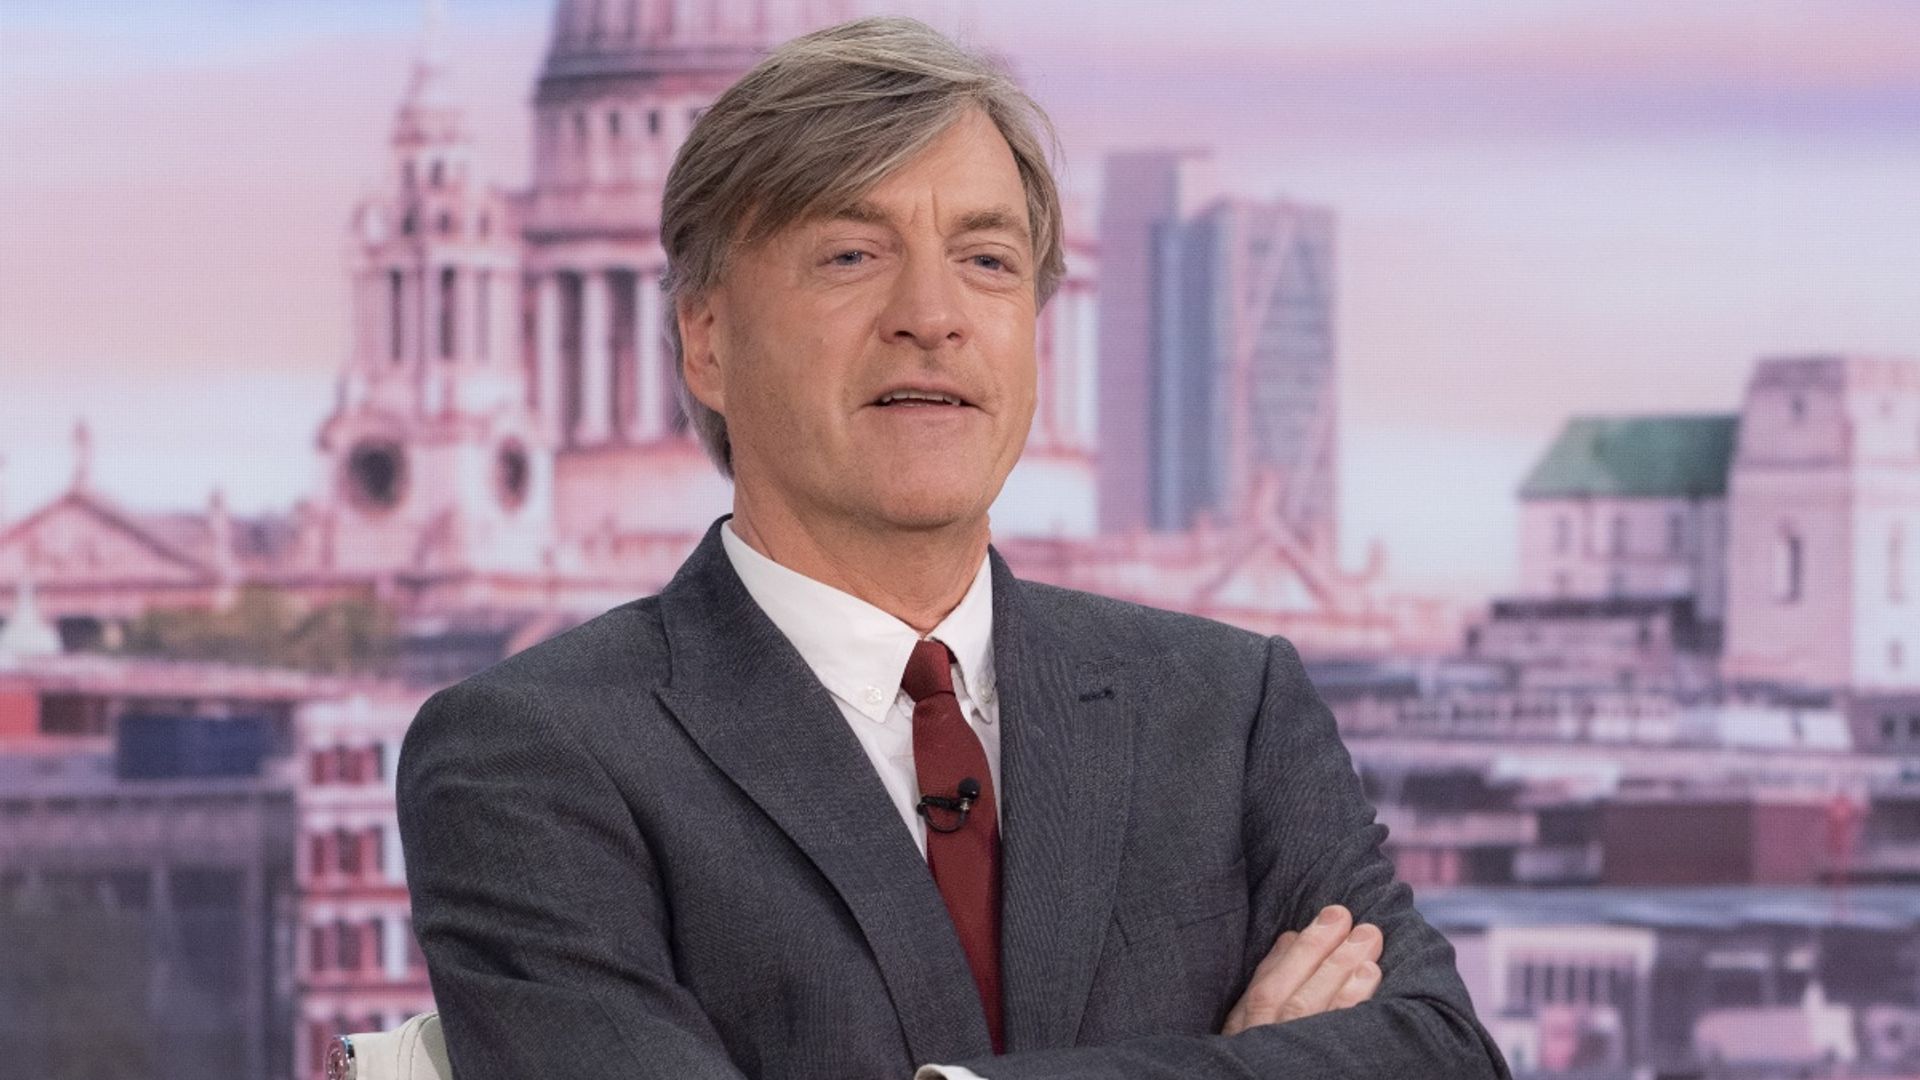 Richard Madeley reveals 'freak accident' that forced him off GMB as he denies sacking report